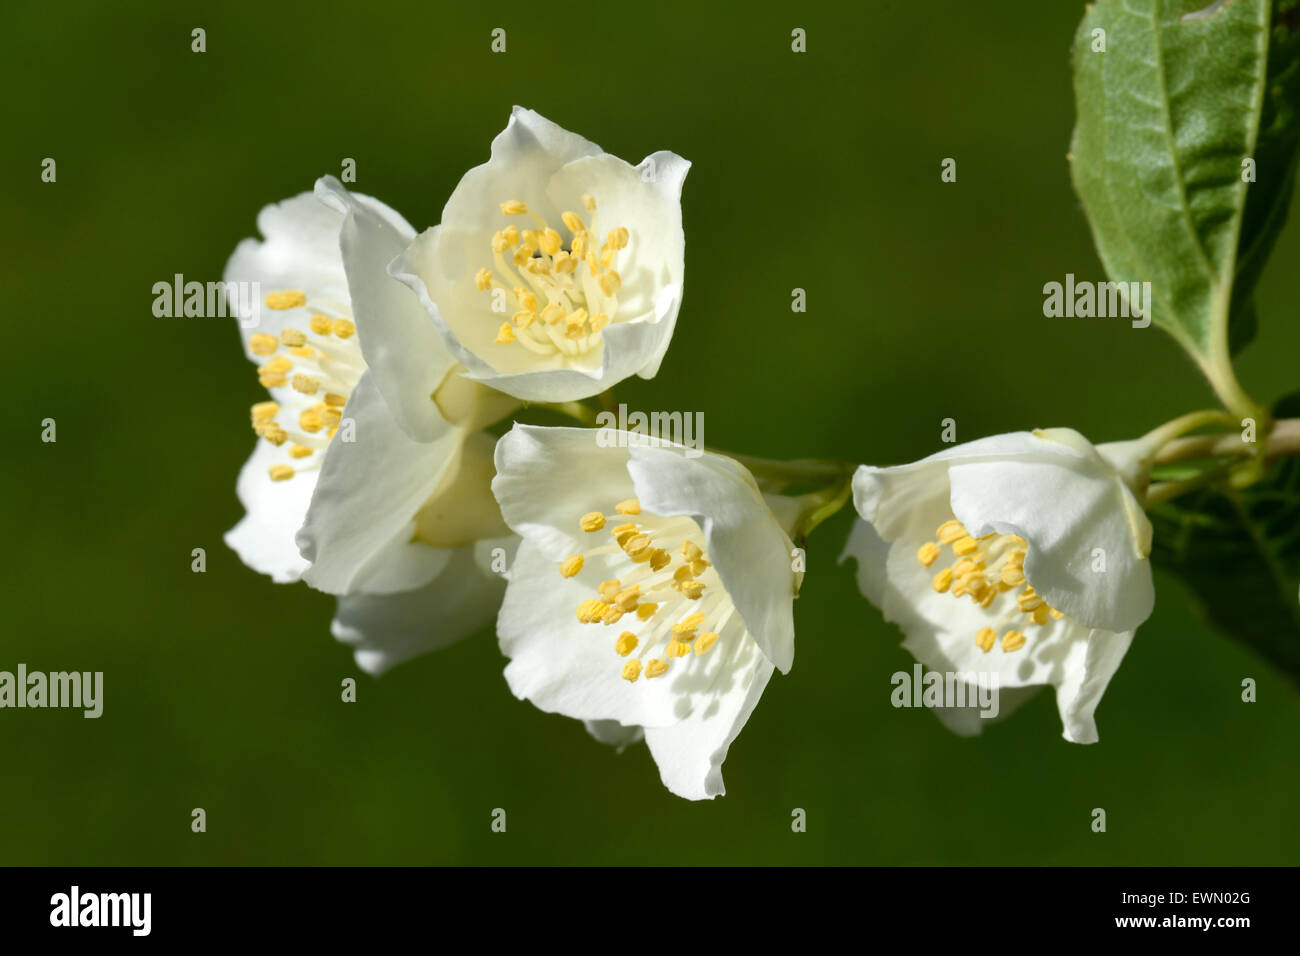 White and odorous flowers of blooming Philadelphus Stock Photo